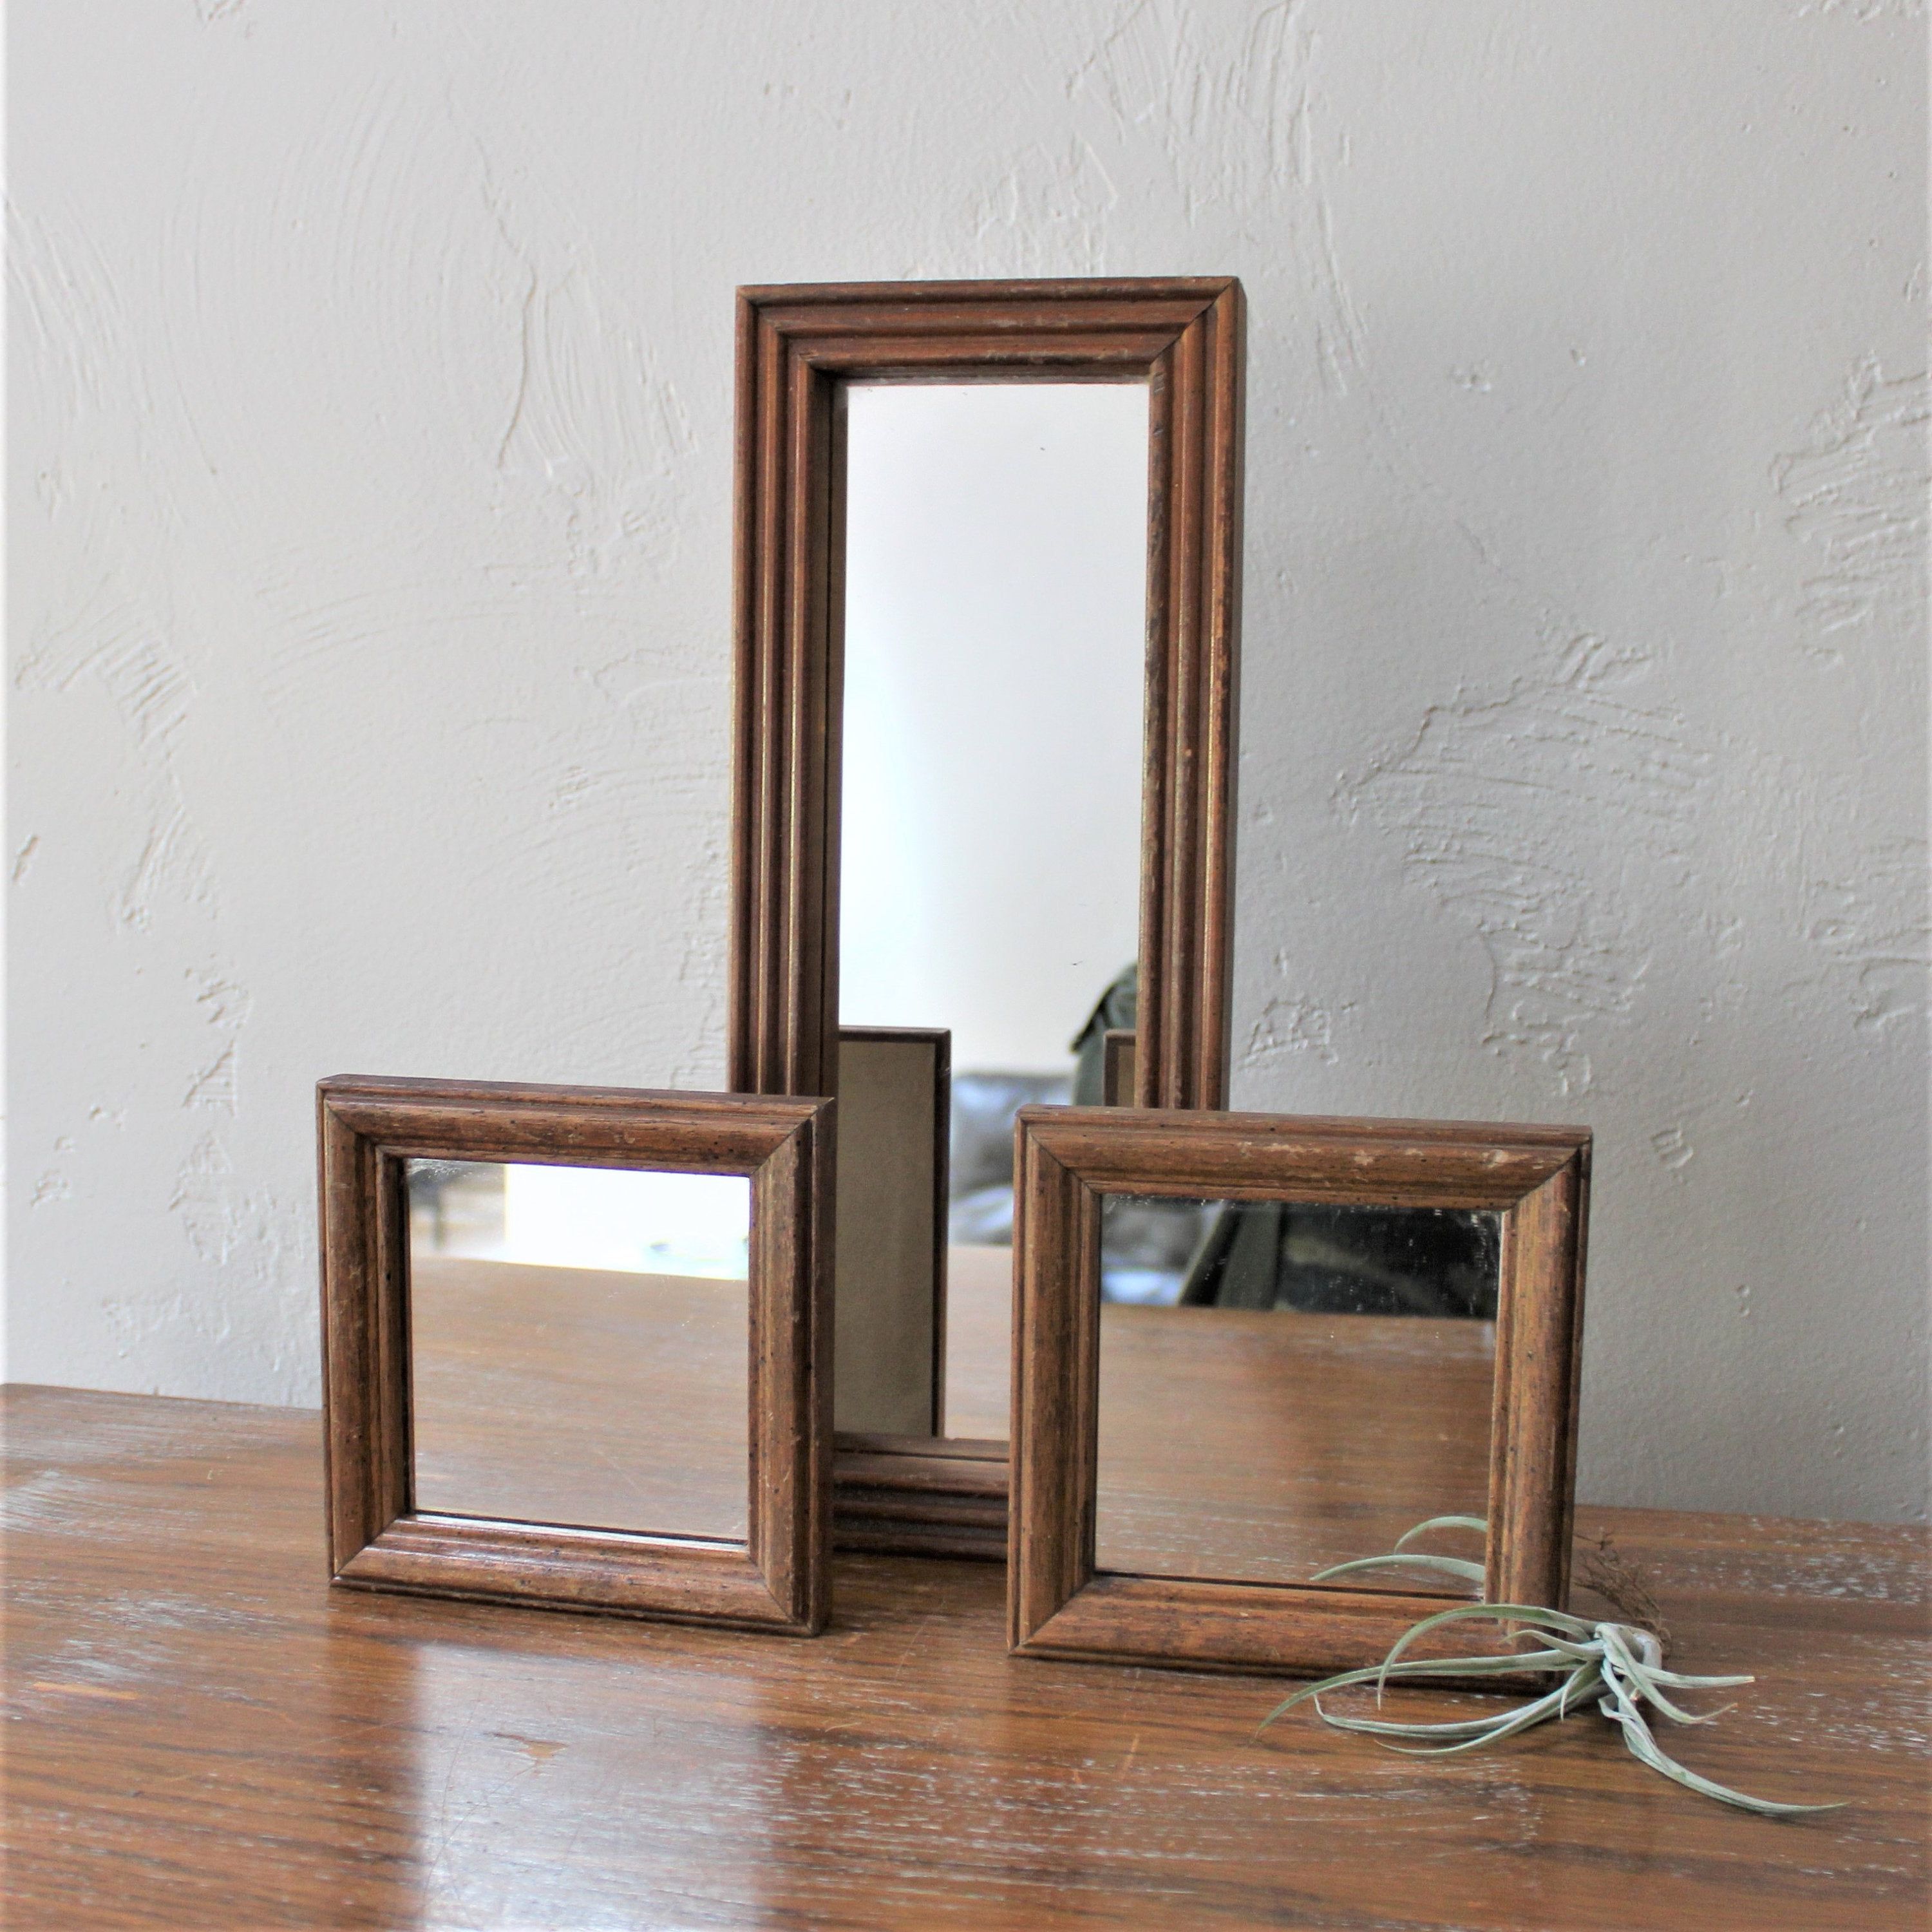 3 Wooden Wall Mirrors, Wood Mirror Set, Entryway Decor, Hall Mirror, Entry  Way Mirror, Long Wall Mirror, Gallery Wall Decor, Square Mirror With Regard To Preferred Entryway Wall Mirrors (View 14 of 20)